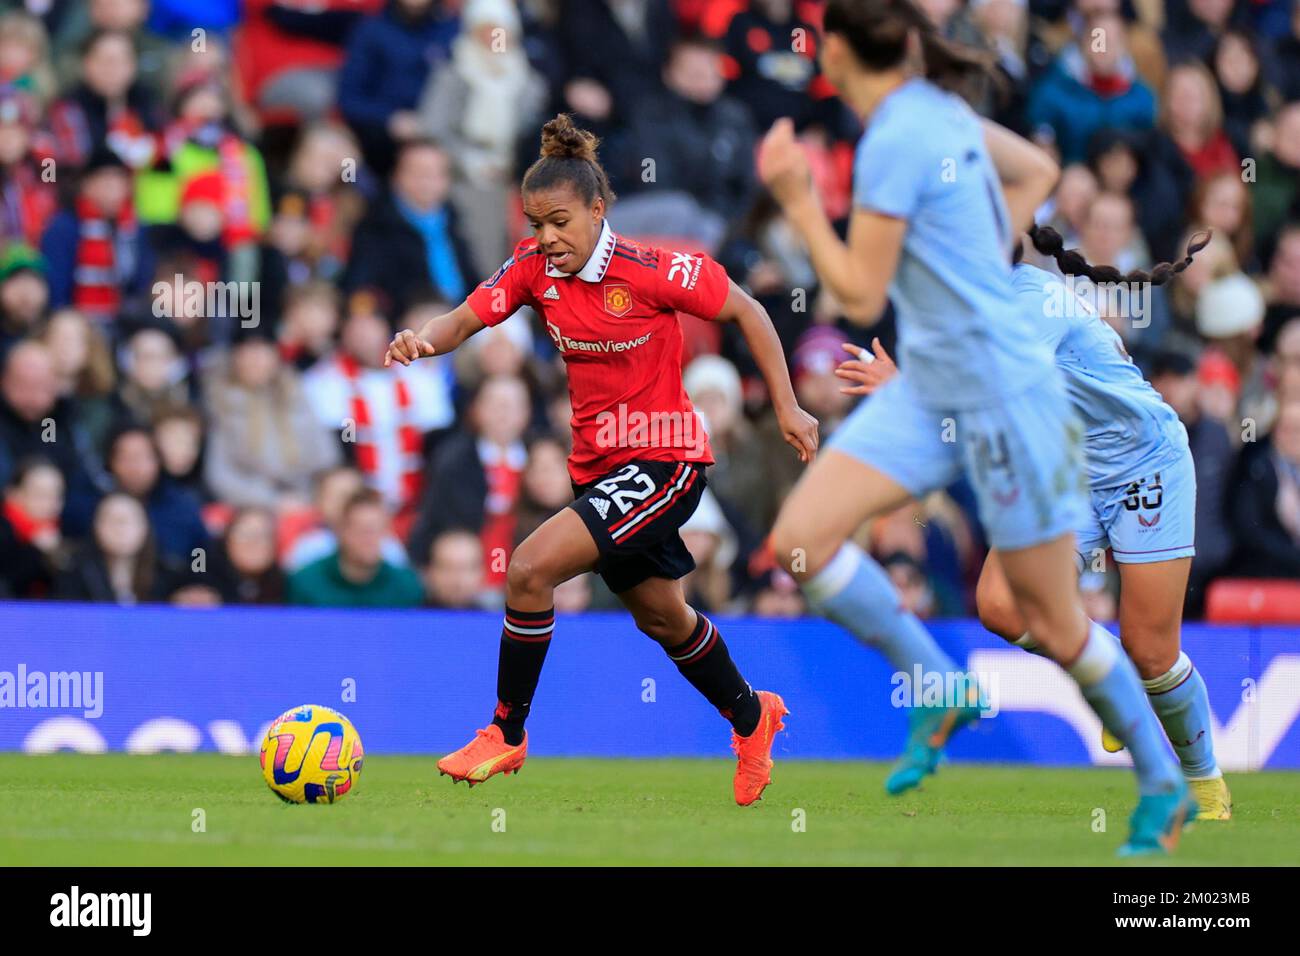 Nikita Parris #22 of Manchester United runs with the ball during The FA Women's Super League match Manchester United Women vs Aston Villa Women at Old Trafford, Manchester, United Kingdom, 3rd December 2022  (Photo by Conor Molloy/News Images) Stock Photo